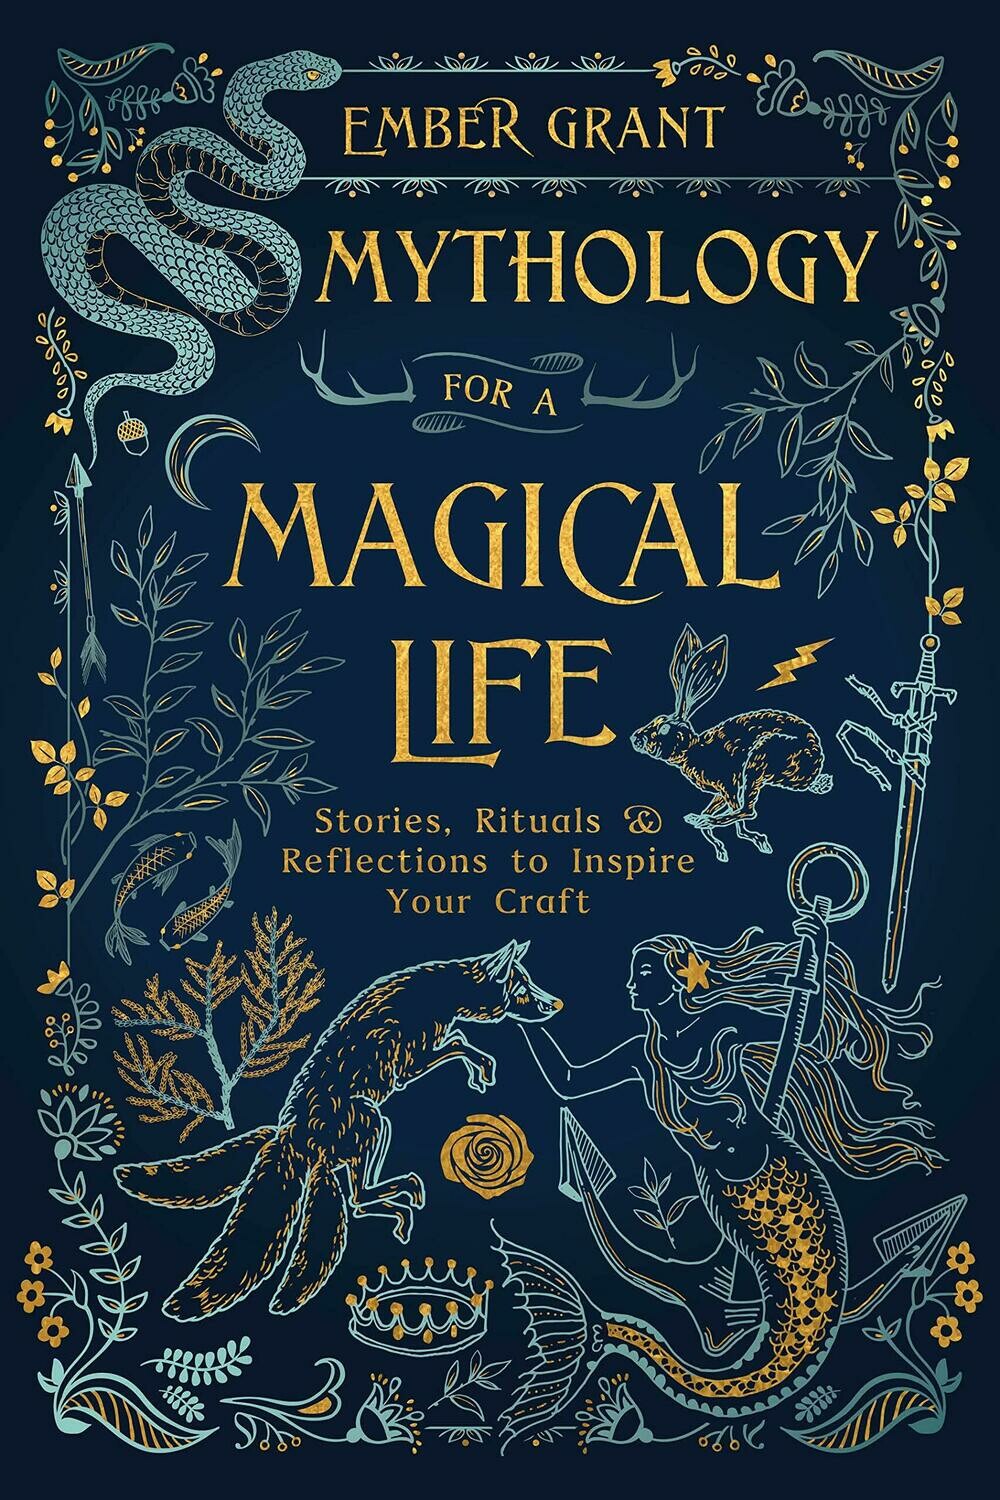 Mythology For A Magical Life by Ember Grant